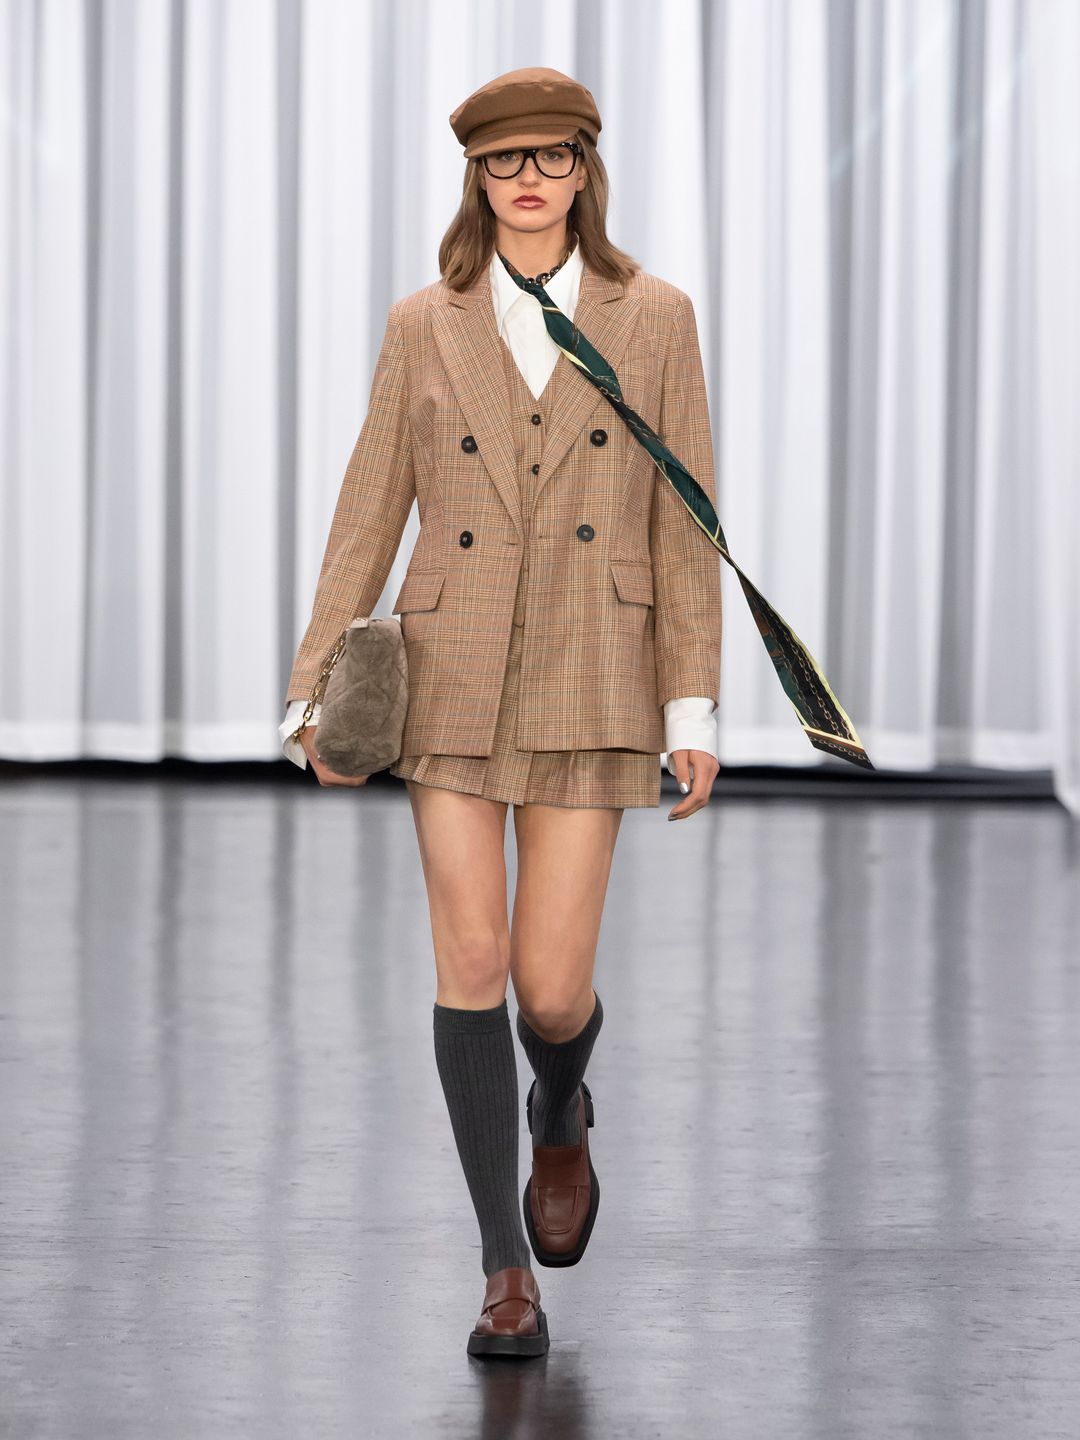 A Model at Marc Cain wears a matching skirt and blazer with knee high socks and brown loafer shoes